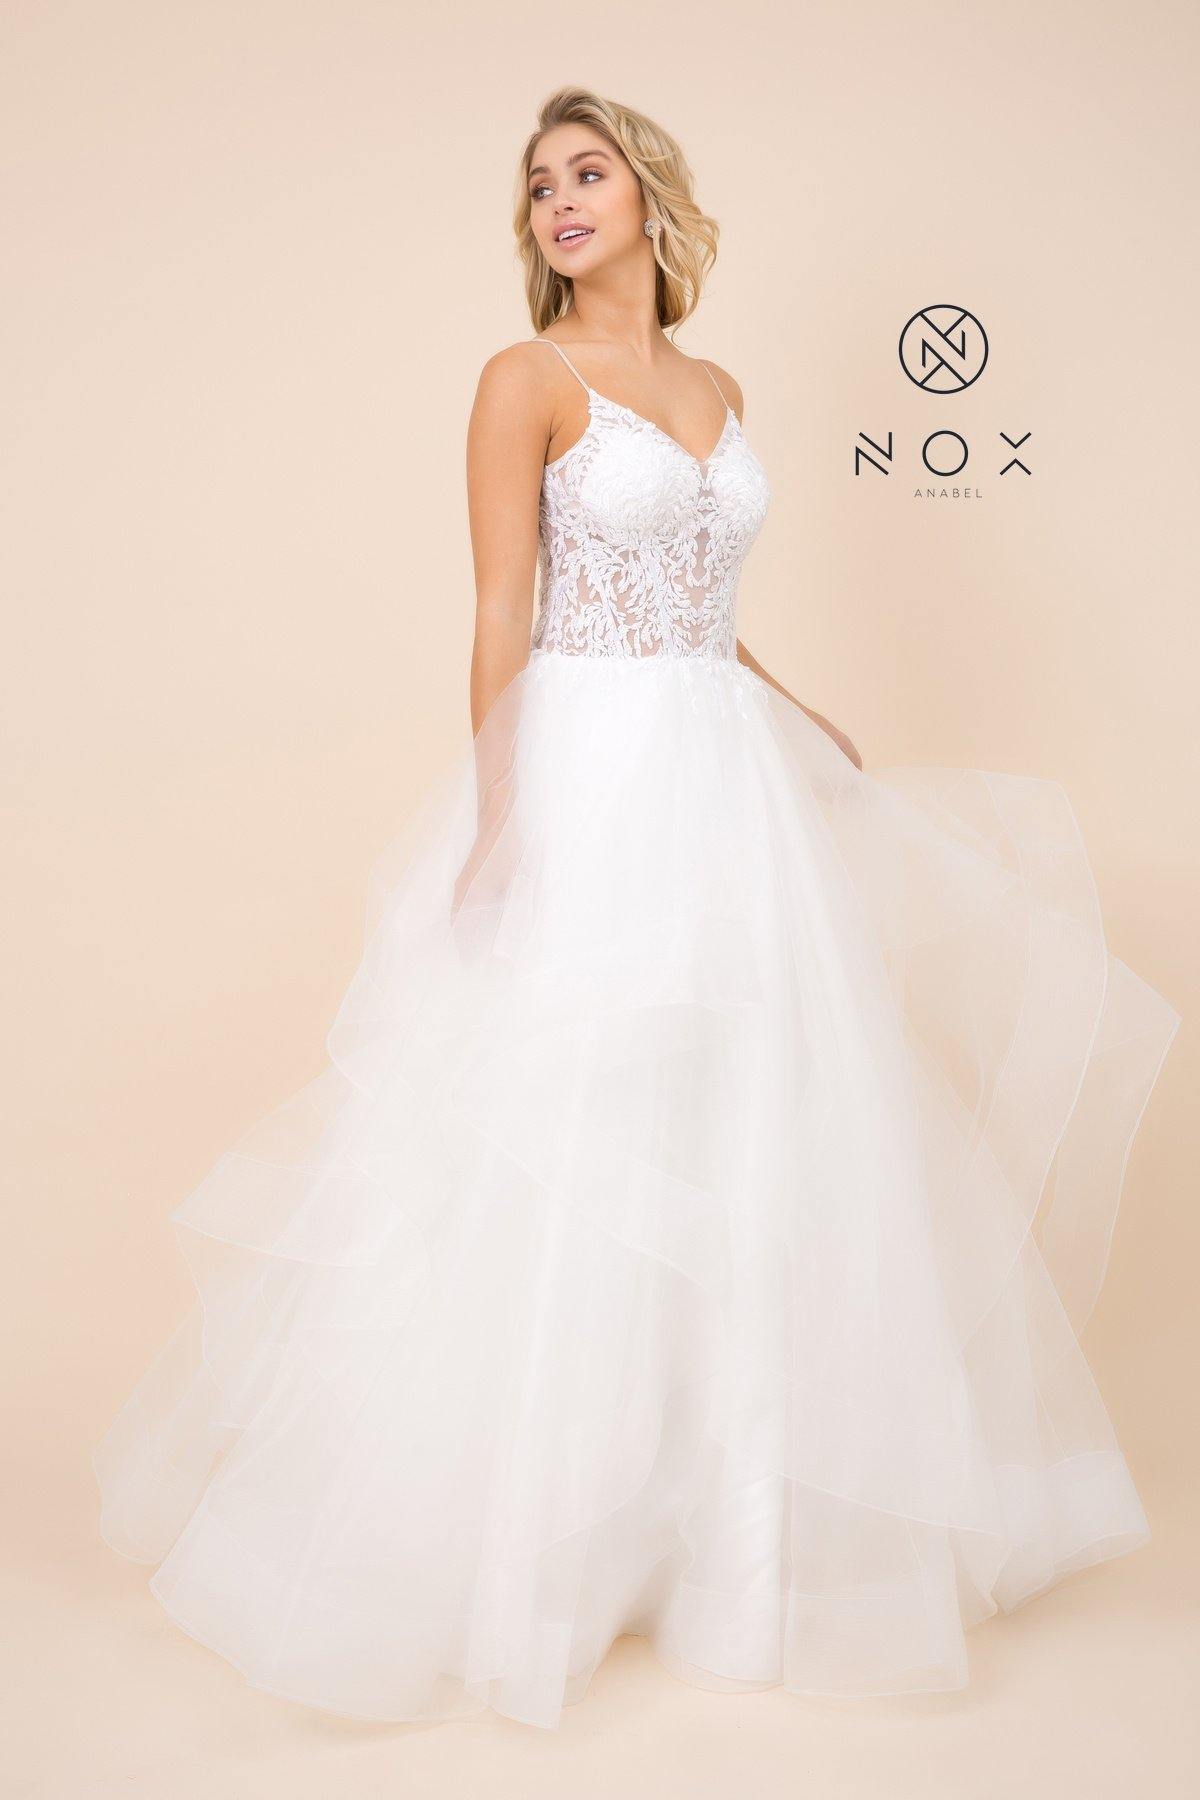 Lace Applique Long Tiered Wedding Dress Formal - The Dress Outlet Nox Anabel